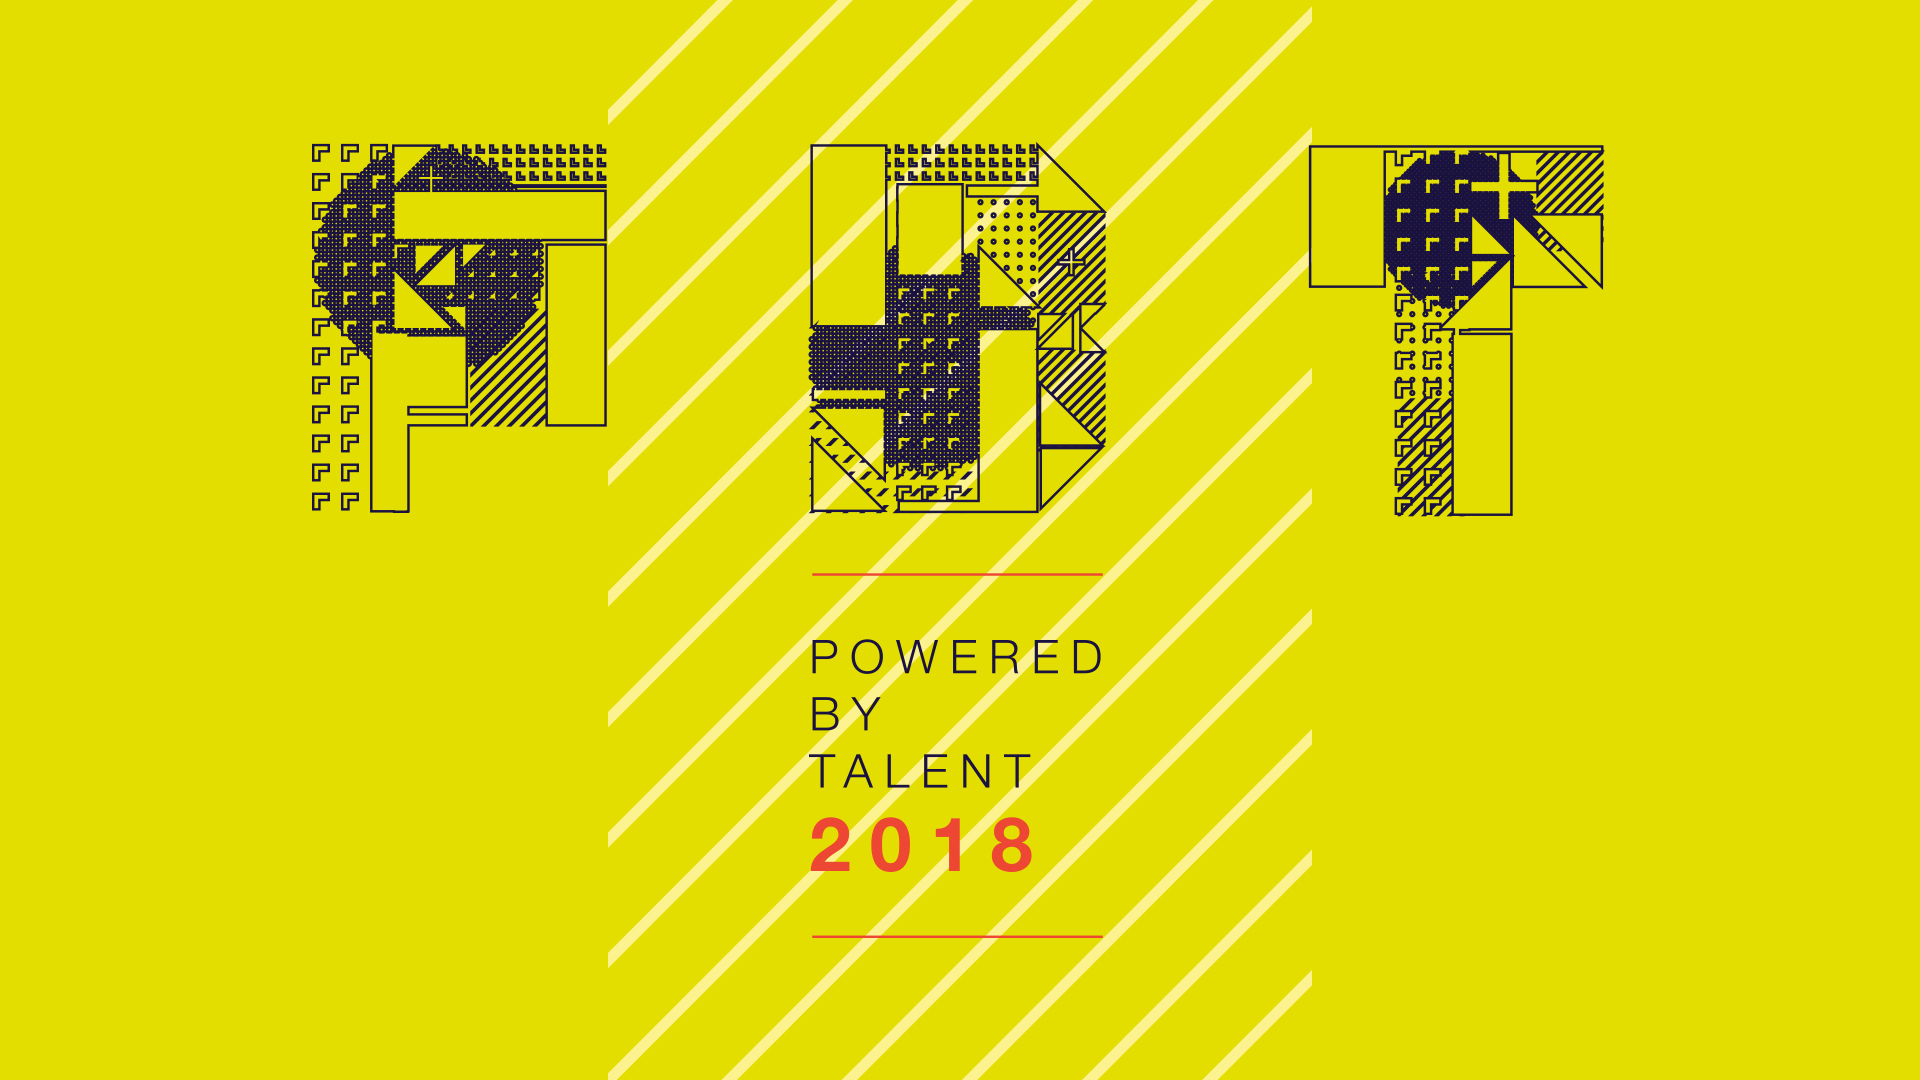 Powered by Talent  PBT sub-brand by Liam Mulherin